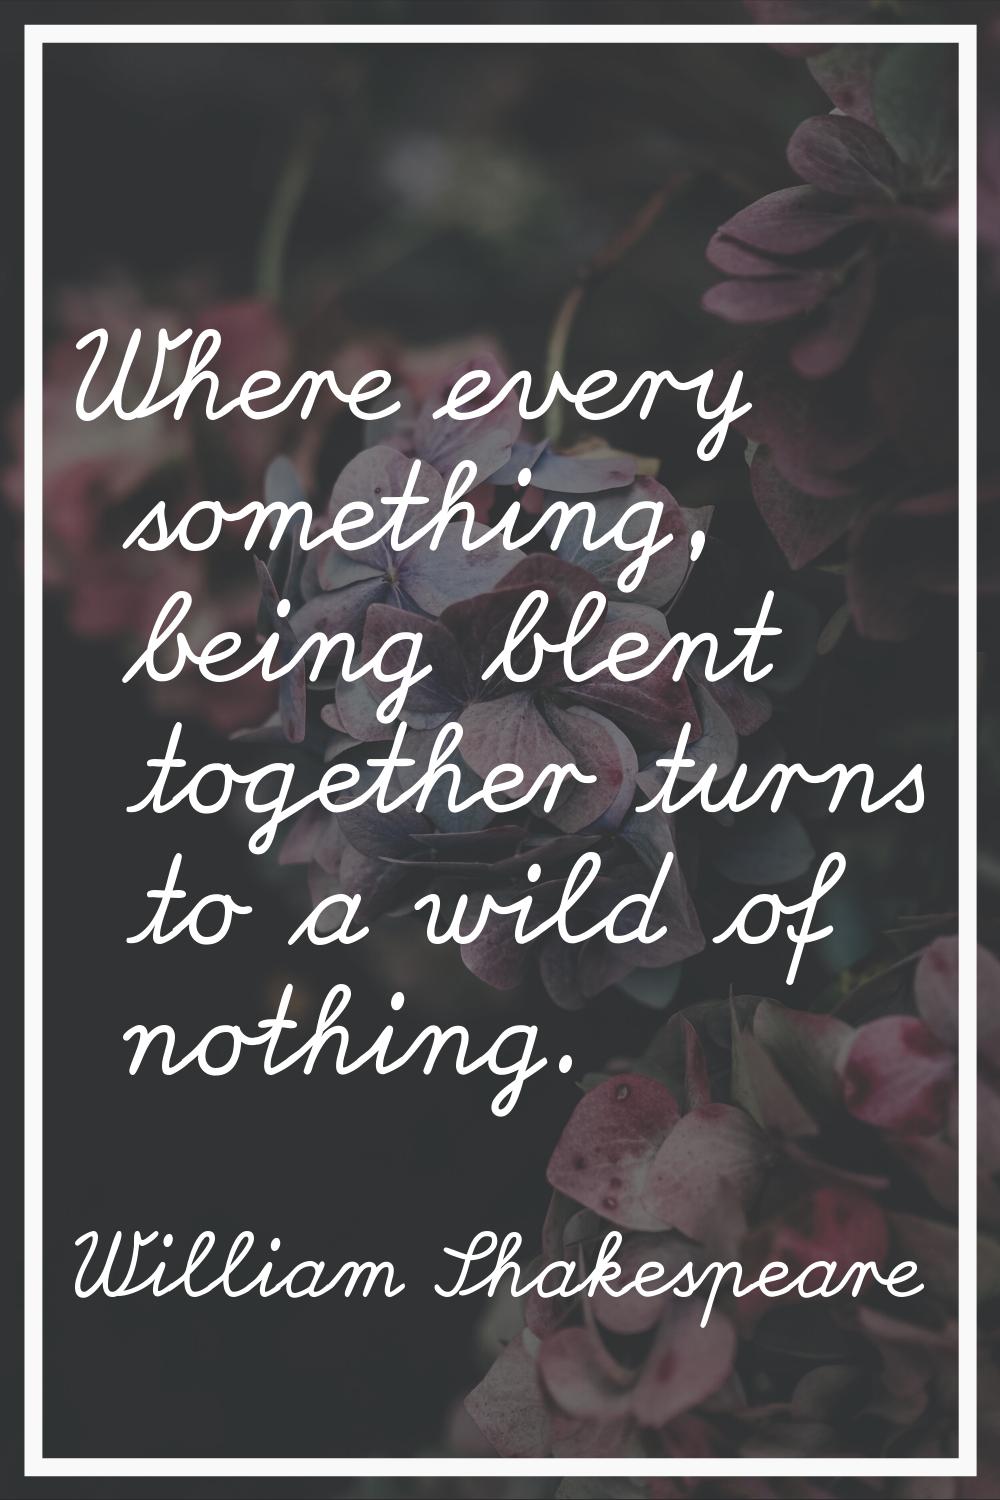 Where every something, being blent together turns to a wild of nothing.